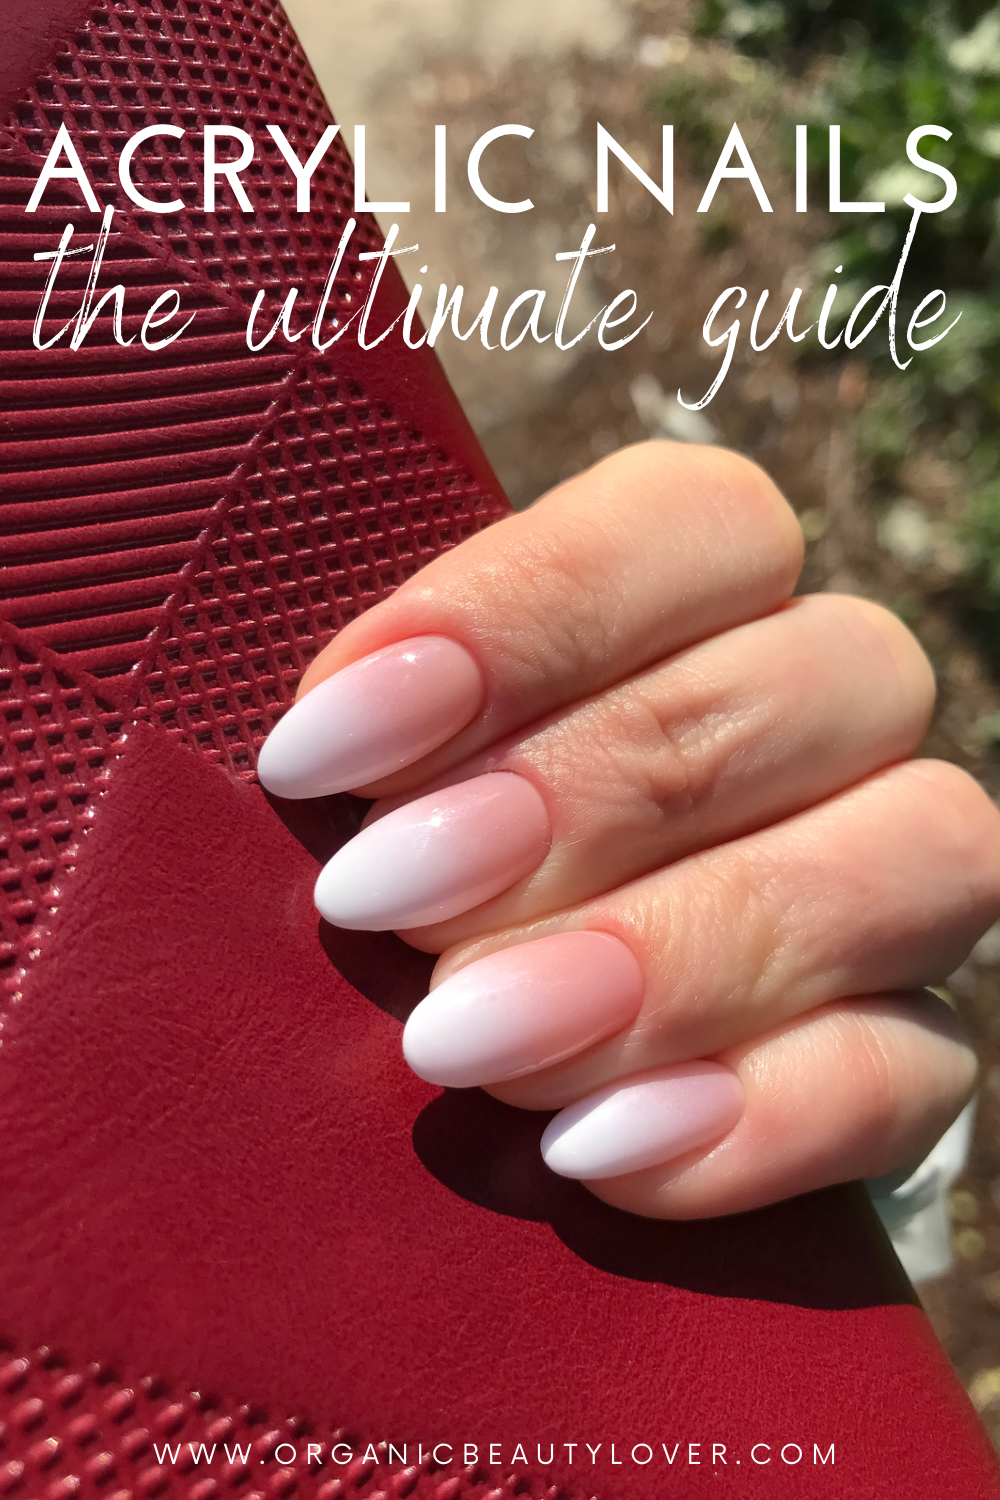 The Beginners Guide to Acrylic Nails